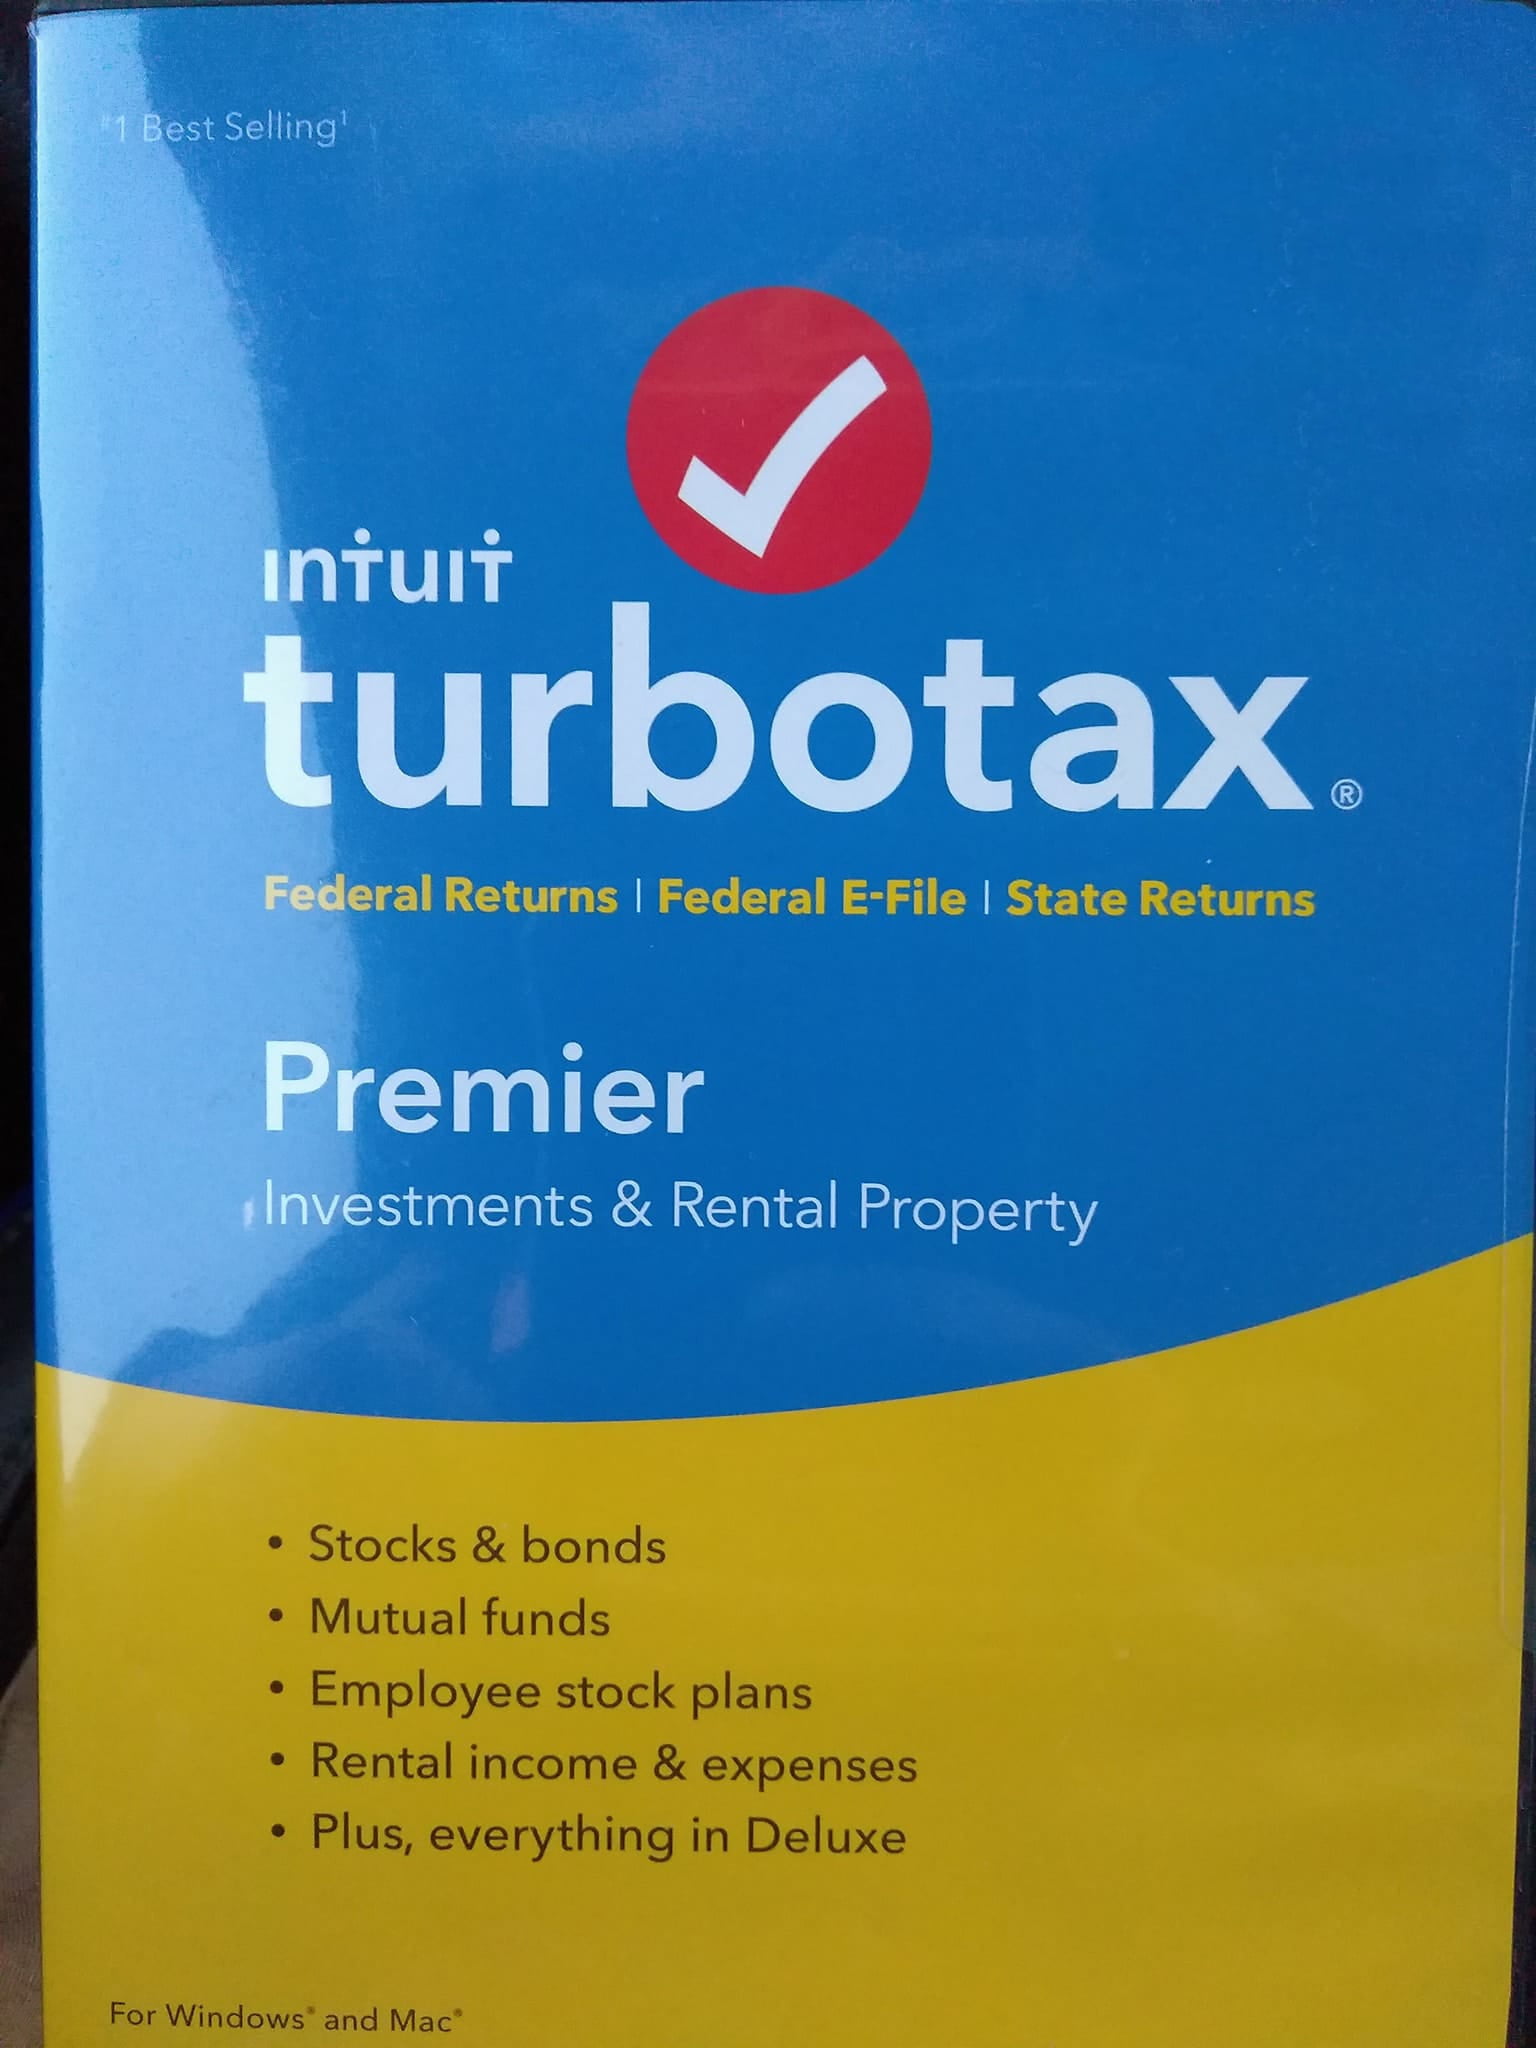 turbotax products